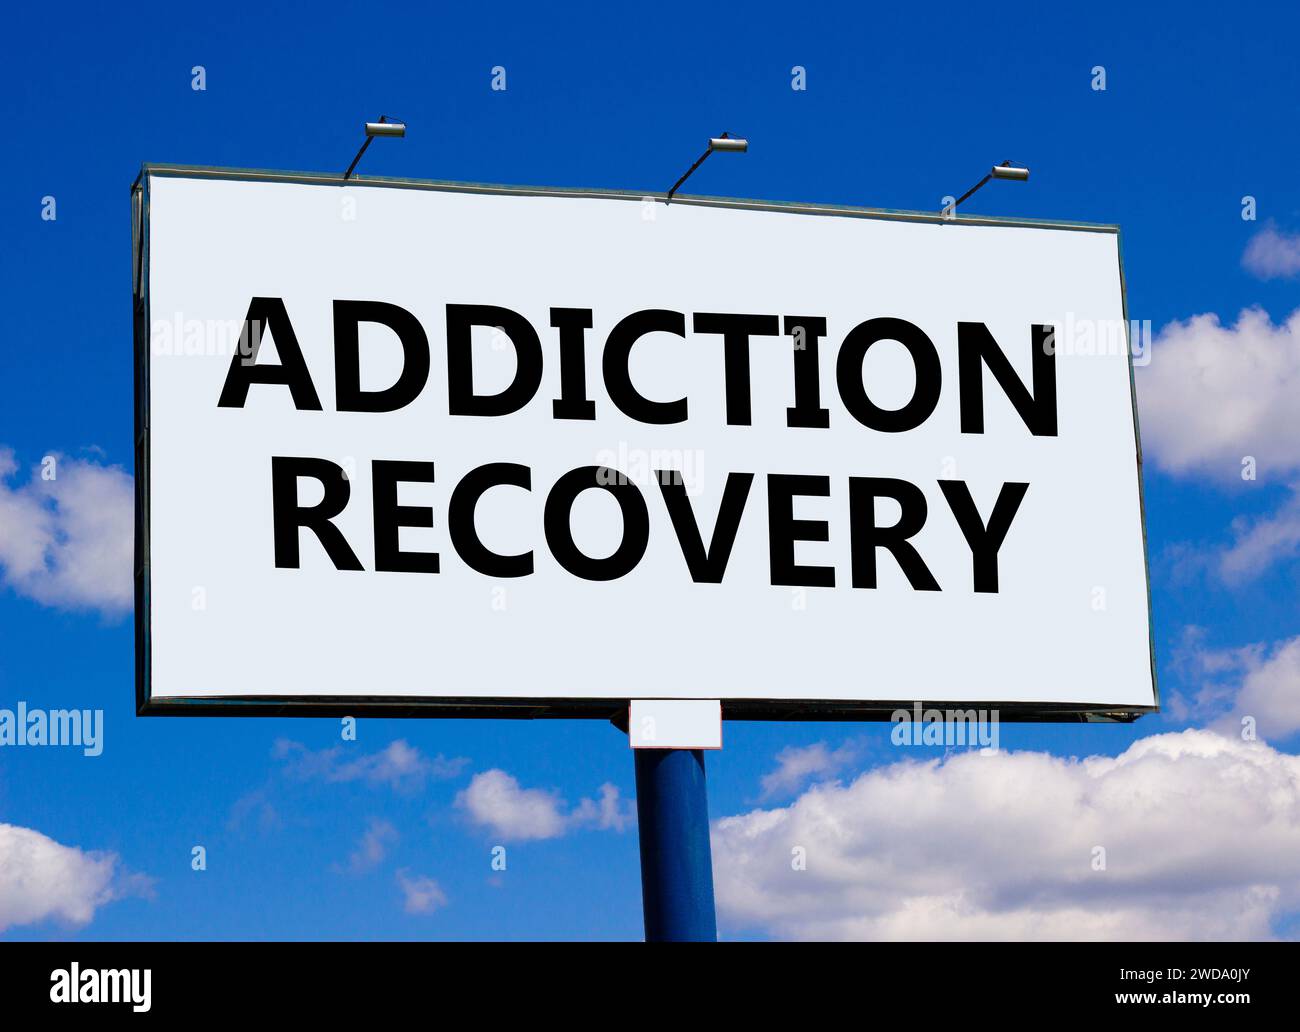 Addiction recovery symbol. Concept words Addiction recovery on beautiful white billboard. Beautiful blue sky white cloud background. Psychology addict Stock Photo